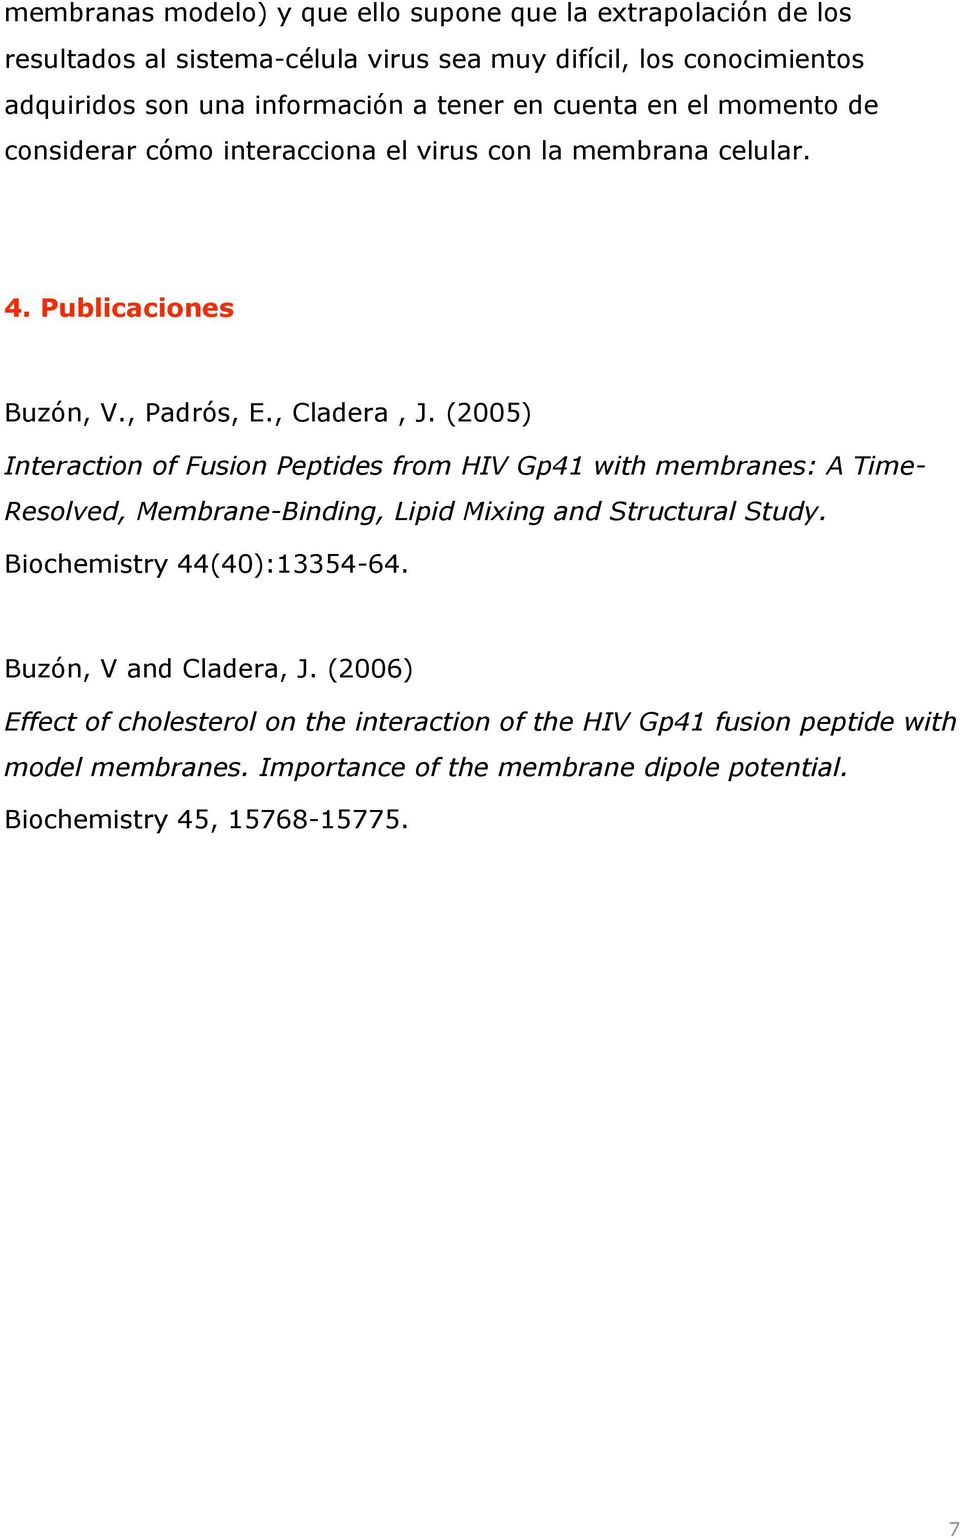 (2005) Interaction of Fusion Peptides from HIV Gp41 with membranes: A Time- Resolved, Membrane-Binding, Lipid Mixing and Structural Study. Biochemistry 44(40):13354-64.